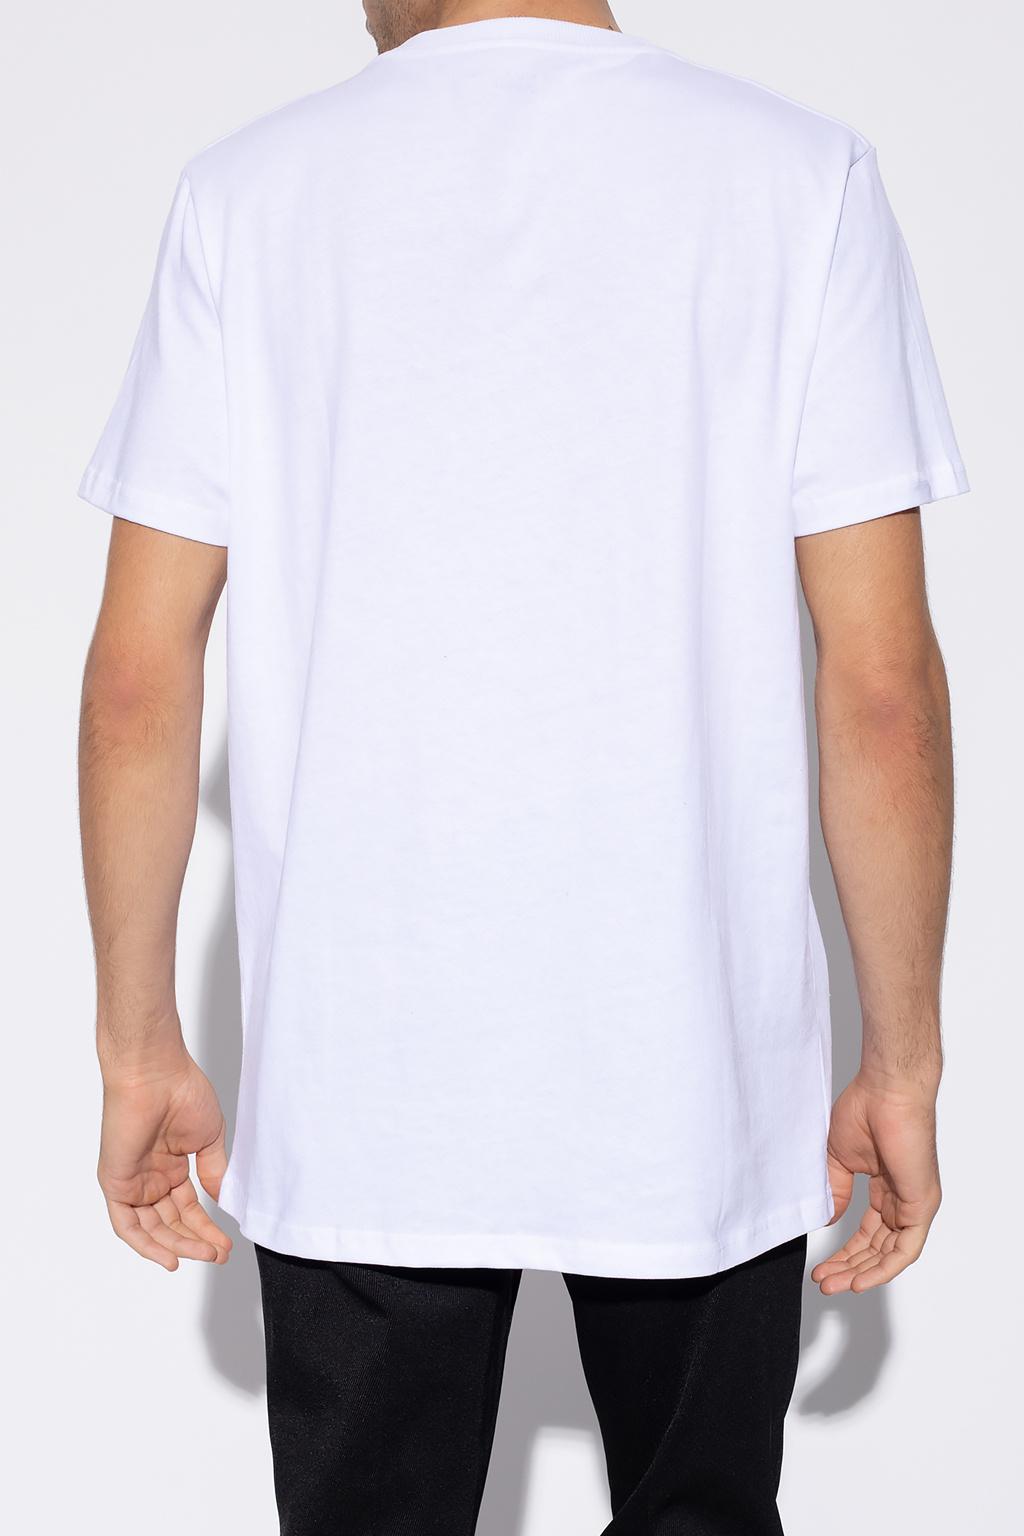 1017 ALYX 9SM Cotton Branded T-shirt Three-pack in White for Men 